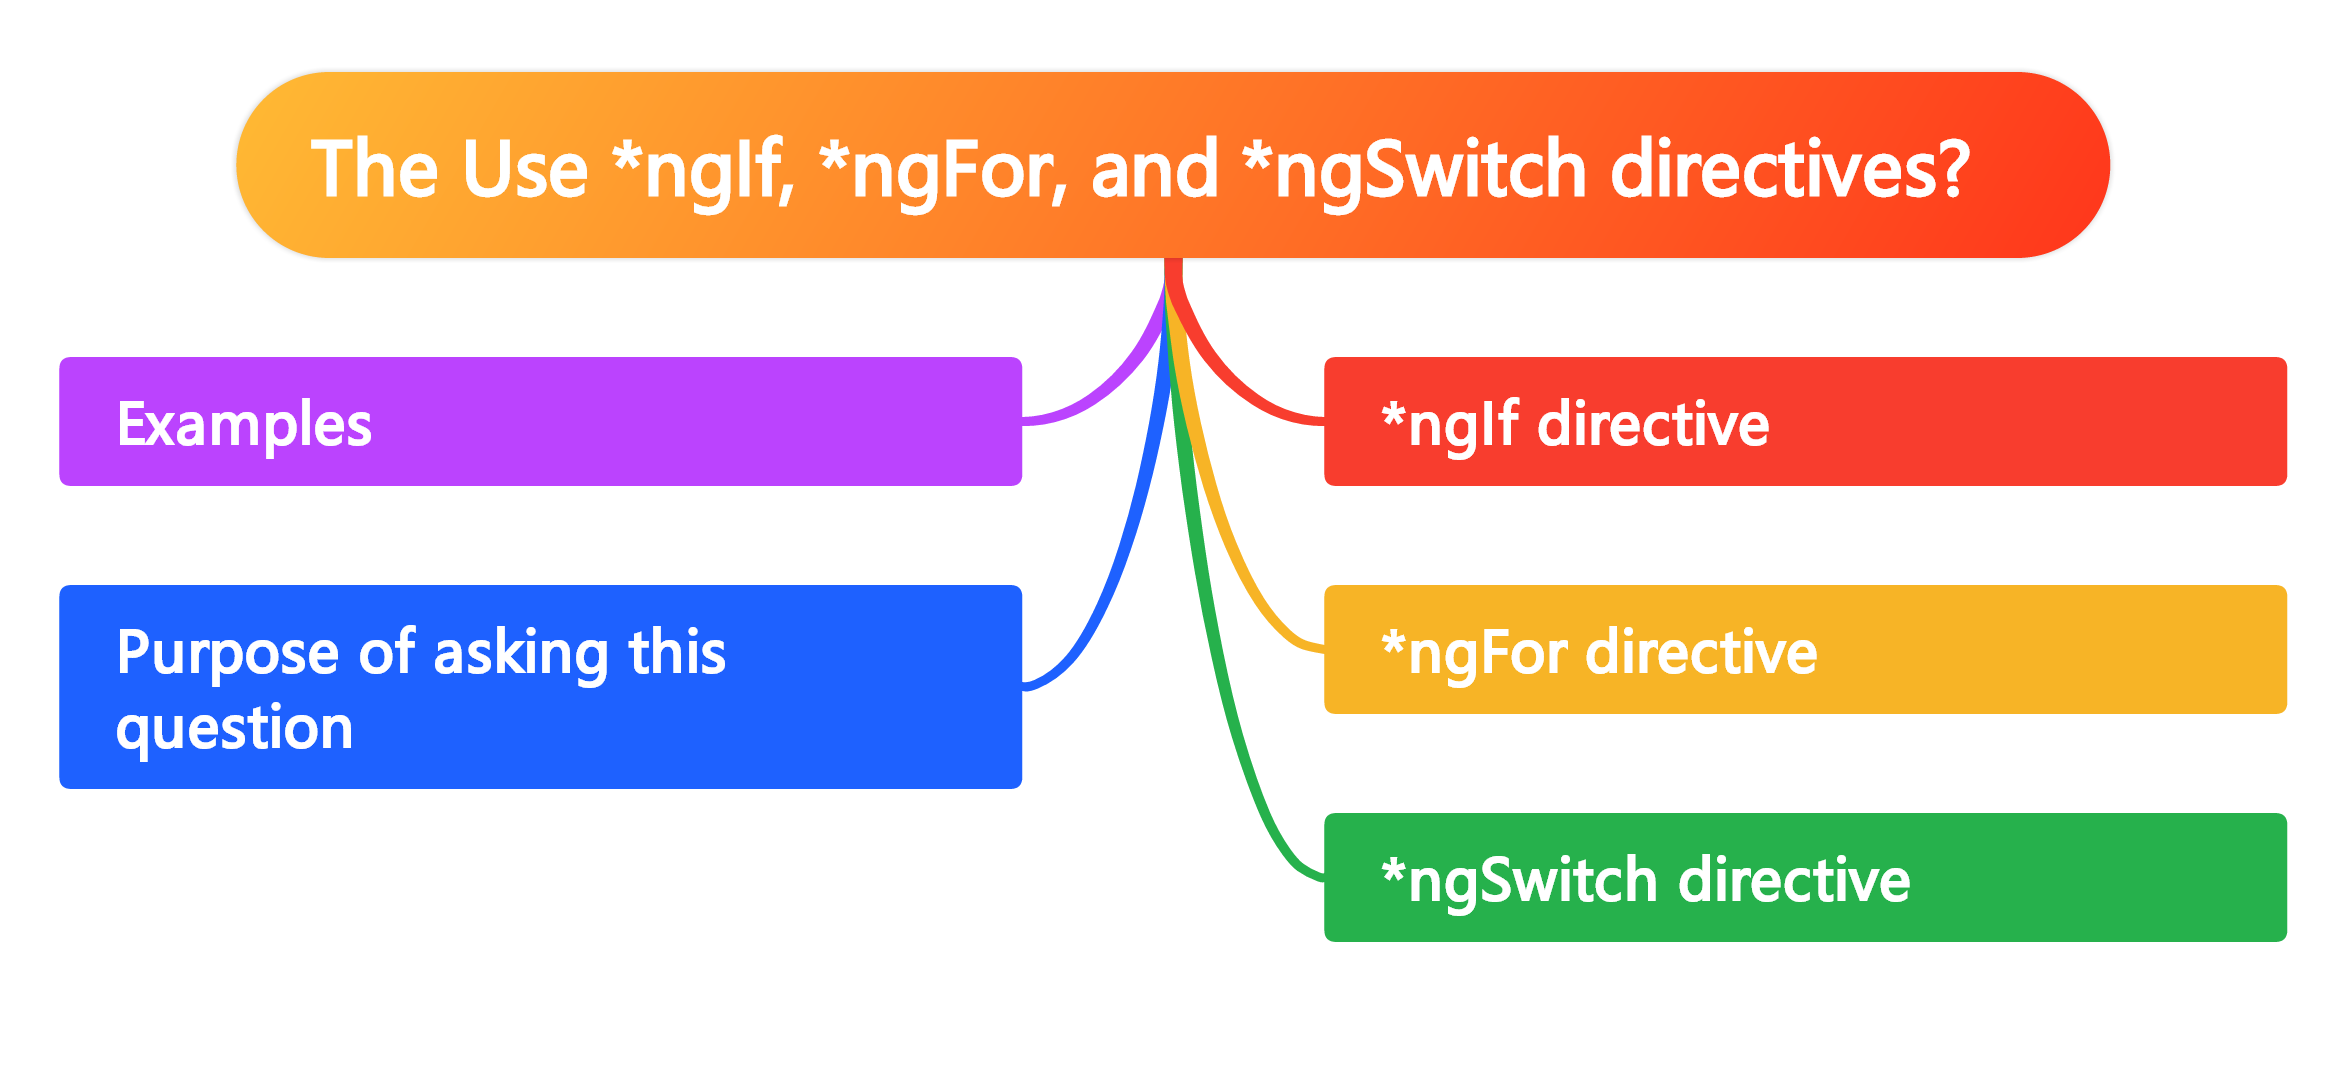 The Use *ngIf, *ngFor, and *ngSwitch directives